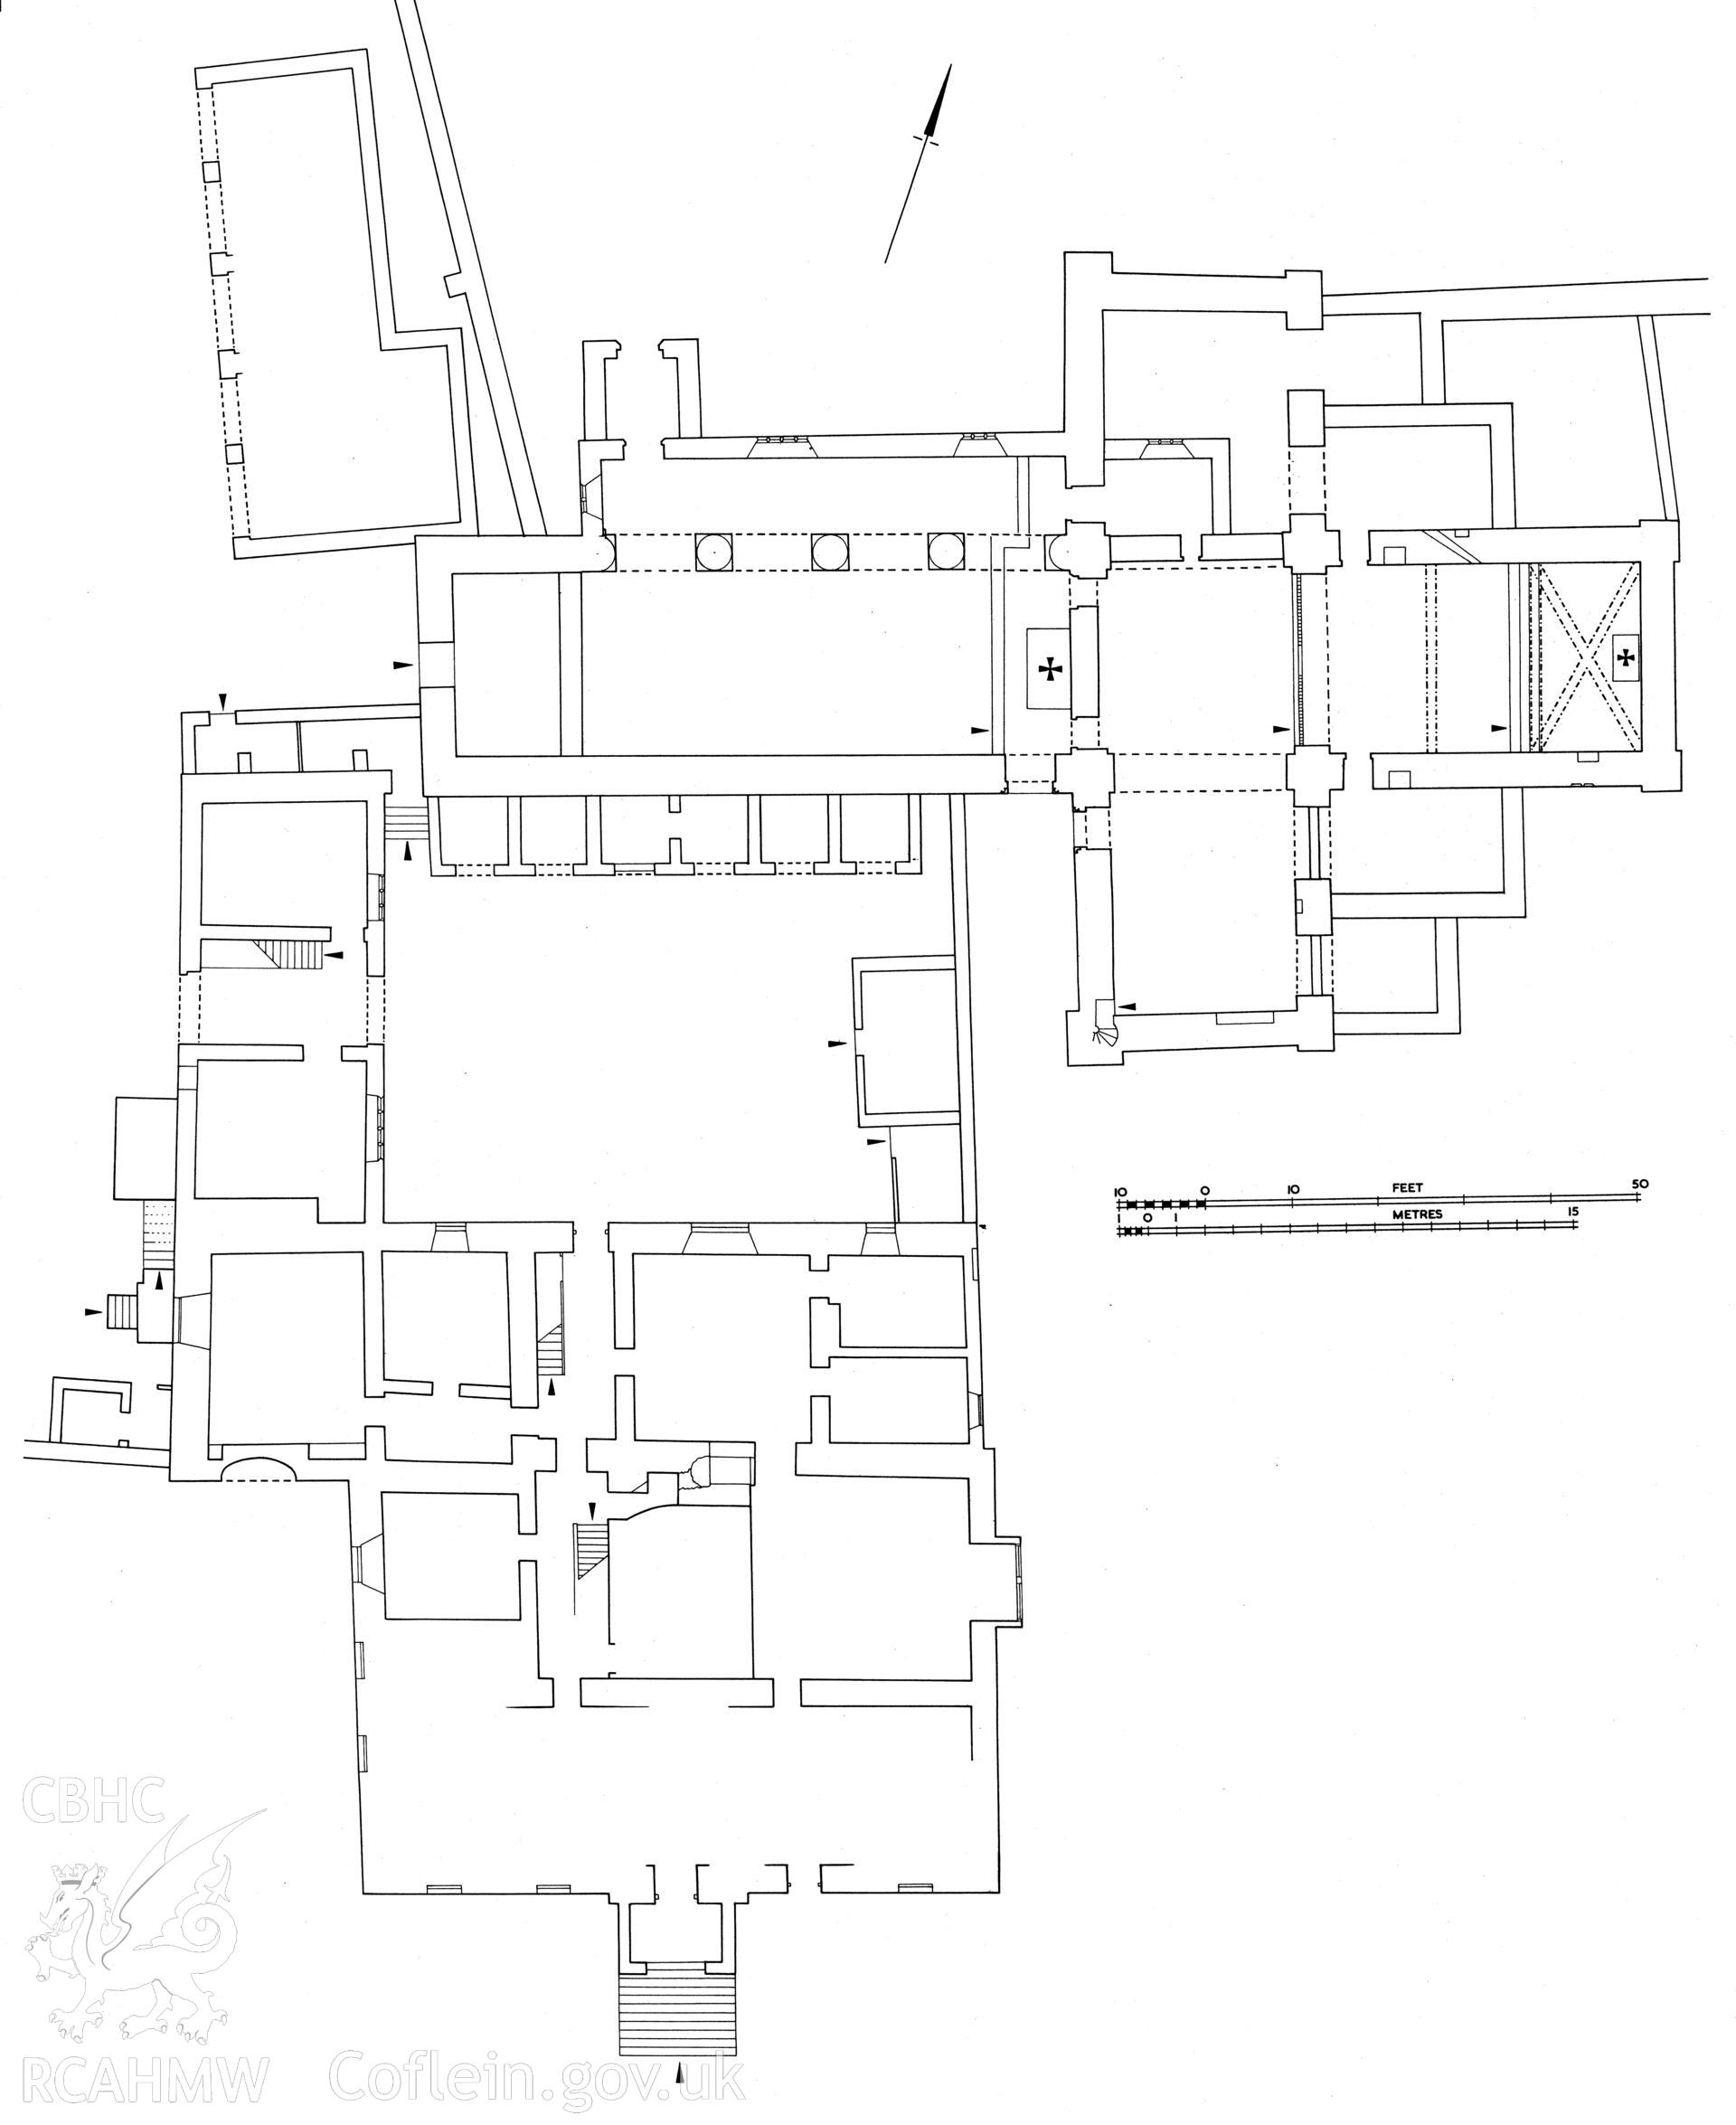 Copy of RCAHMW drawing showing plan of St Michaels Church, Ewenny Priory, Glamorgan.